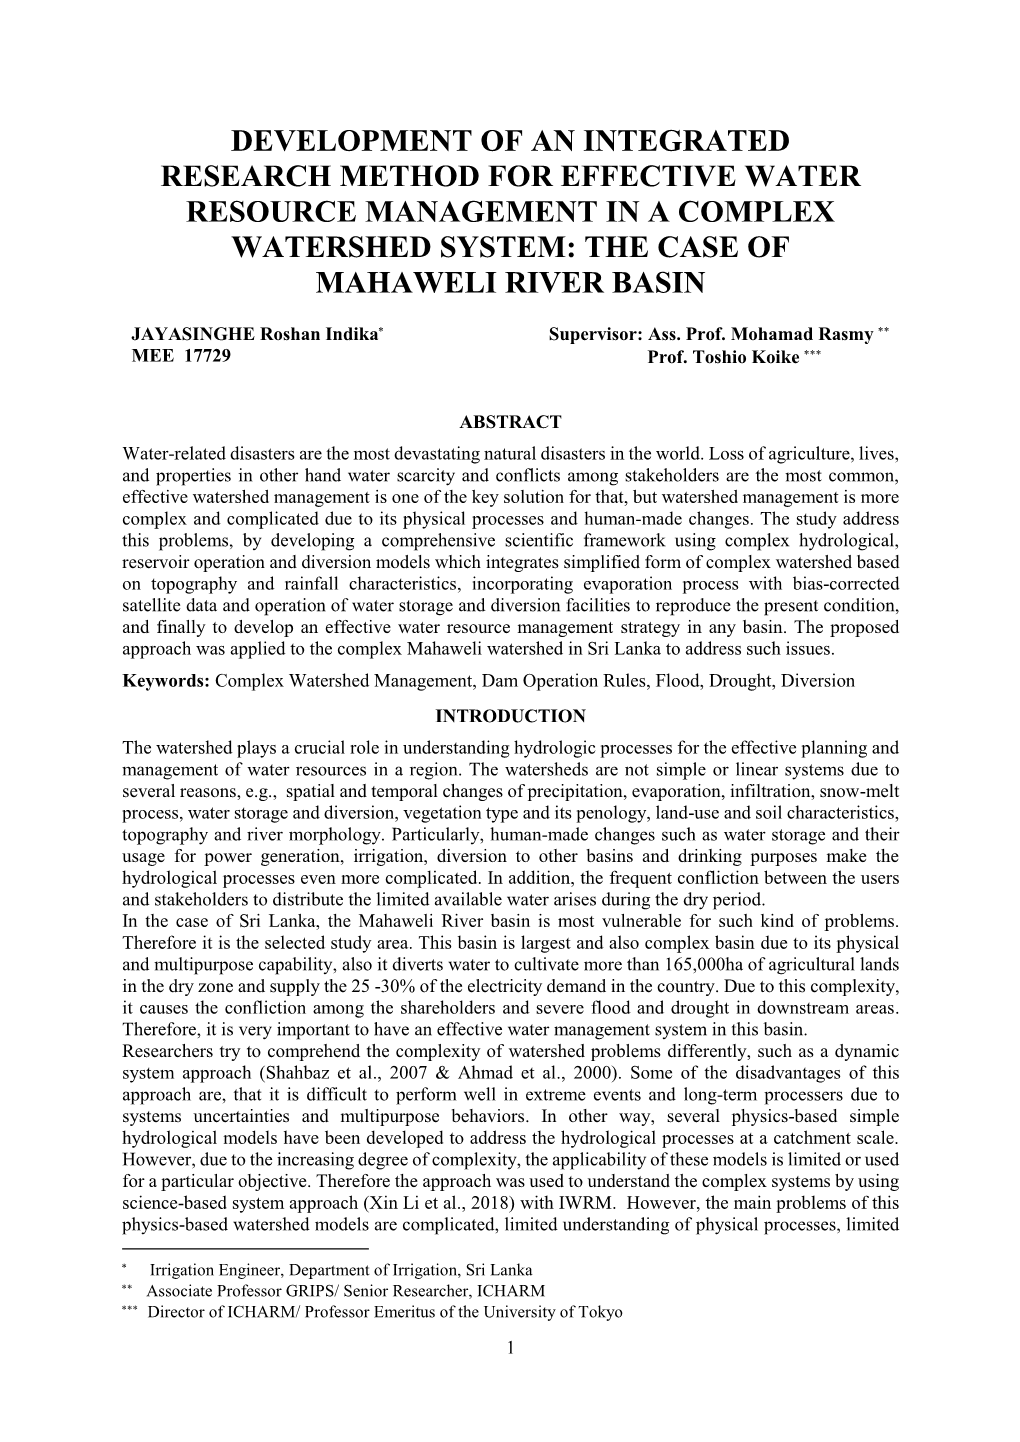 Development of an Integrated Research Method for Effective Water Resource Management in a Complex Watershed System: the Case of Mahaweli River Basin